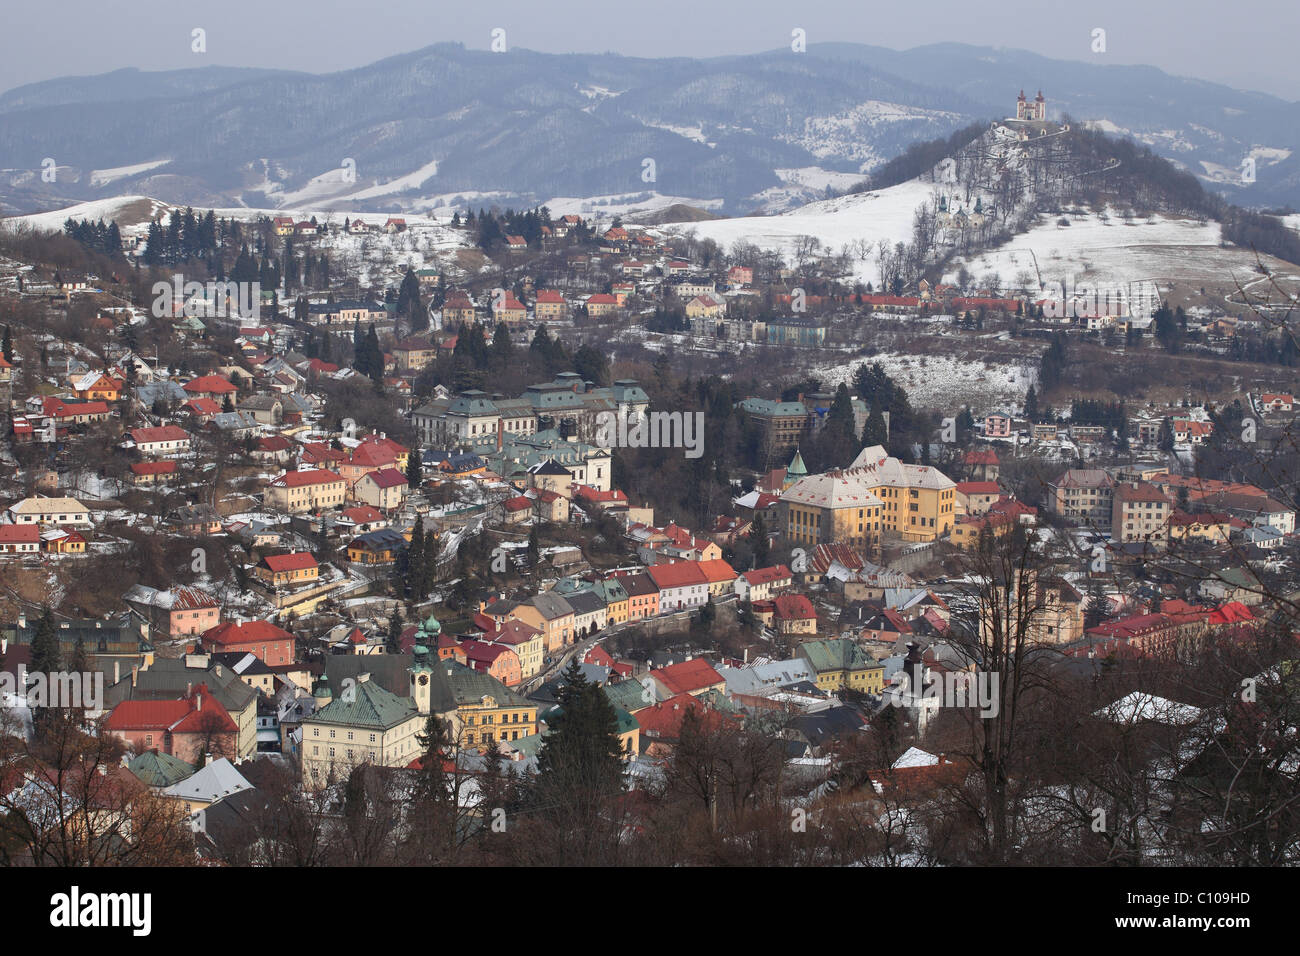 The view of Banska Stiavnica, the old medieval mining town registered on the UNESCO World Heritage list. Stock Photo